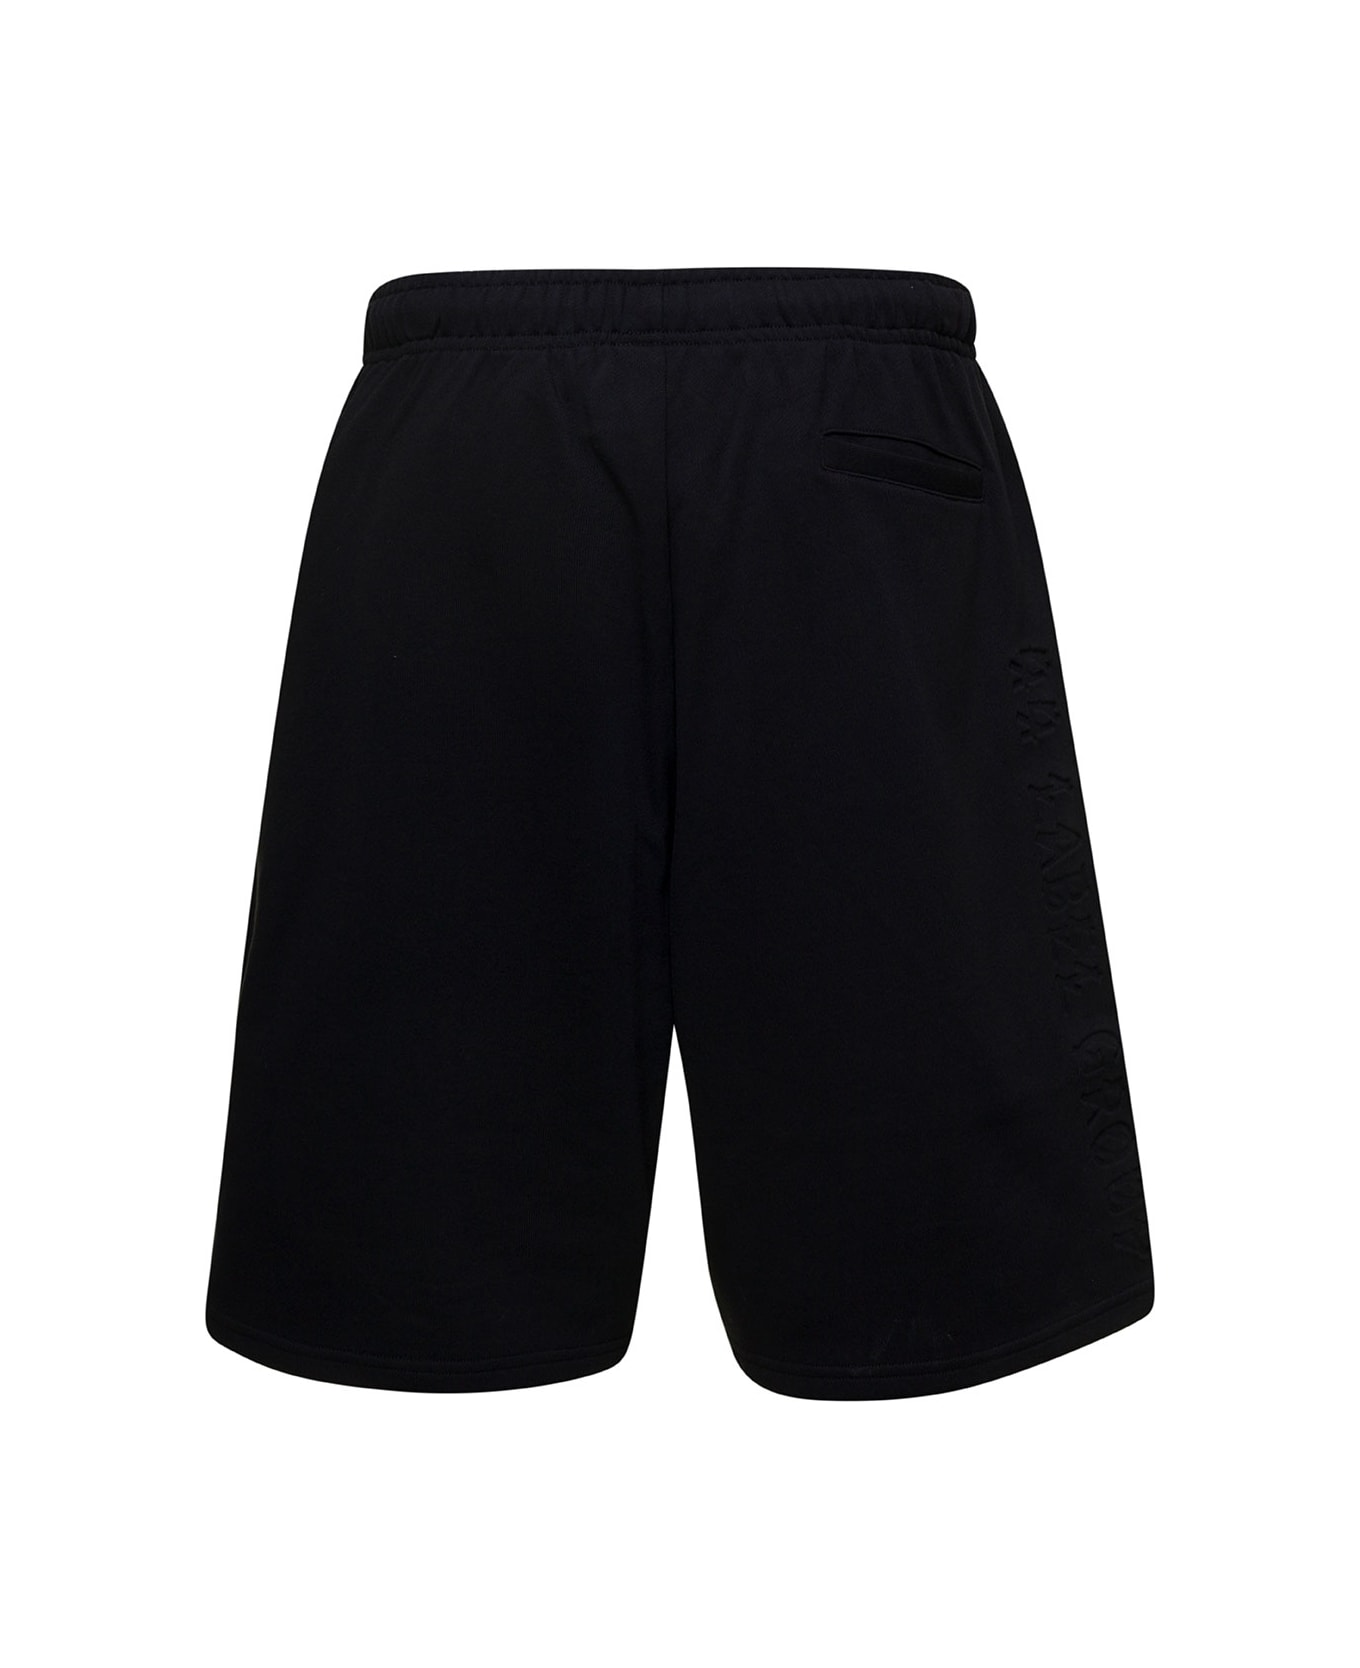 44 Label Group Black Shorts With Logo Print In Cotton Man - Black ショートパンツ